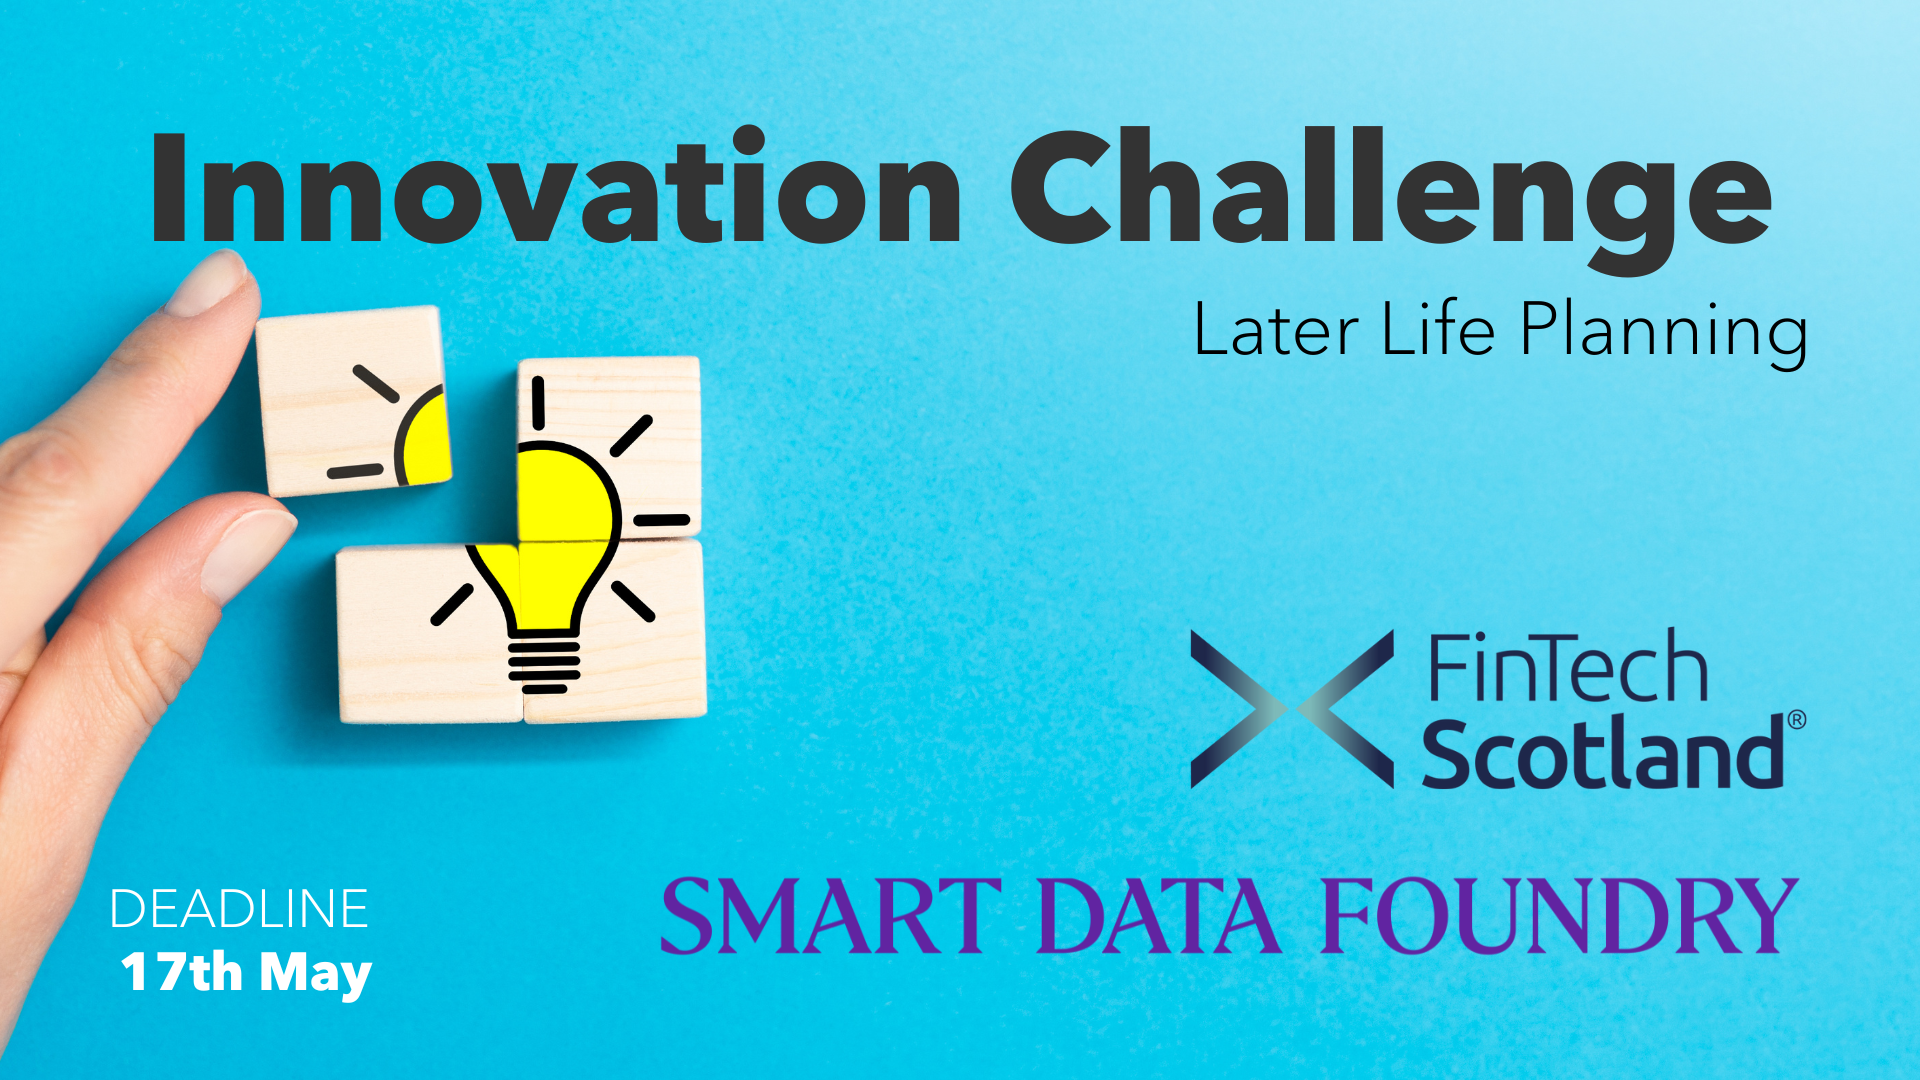 UK fintech challenge to pioneers data-driven solutions for later life planning